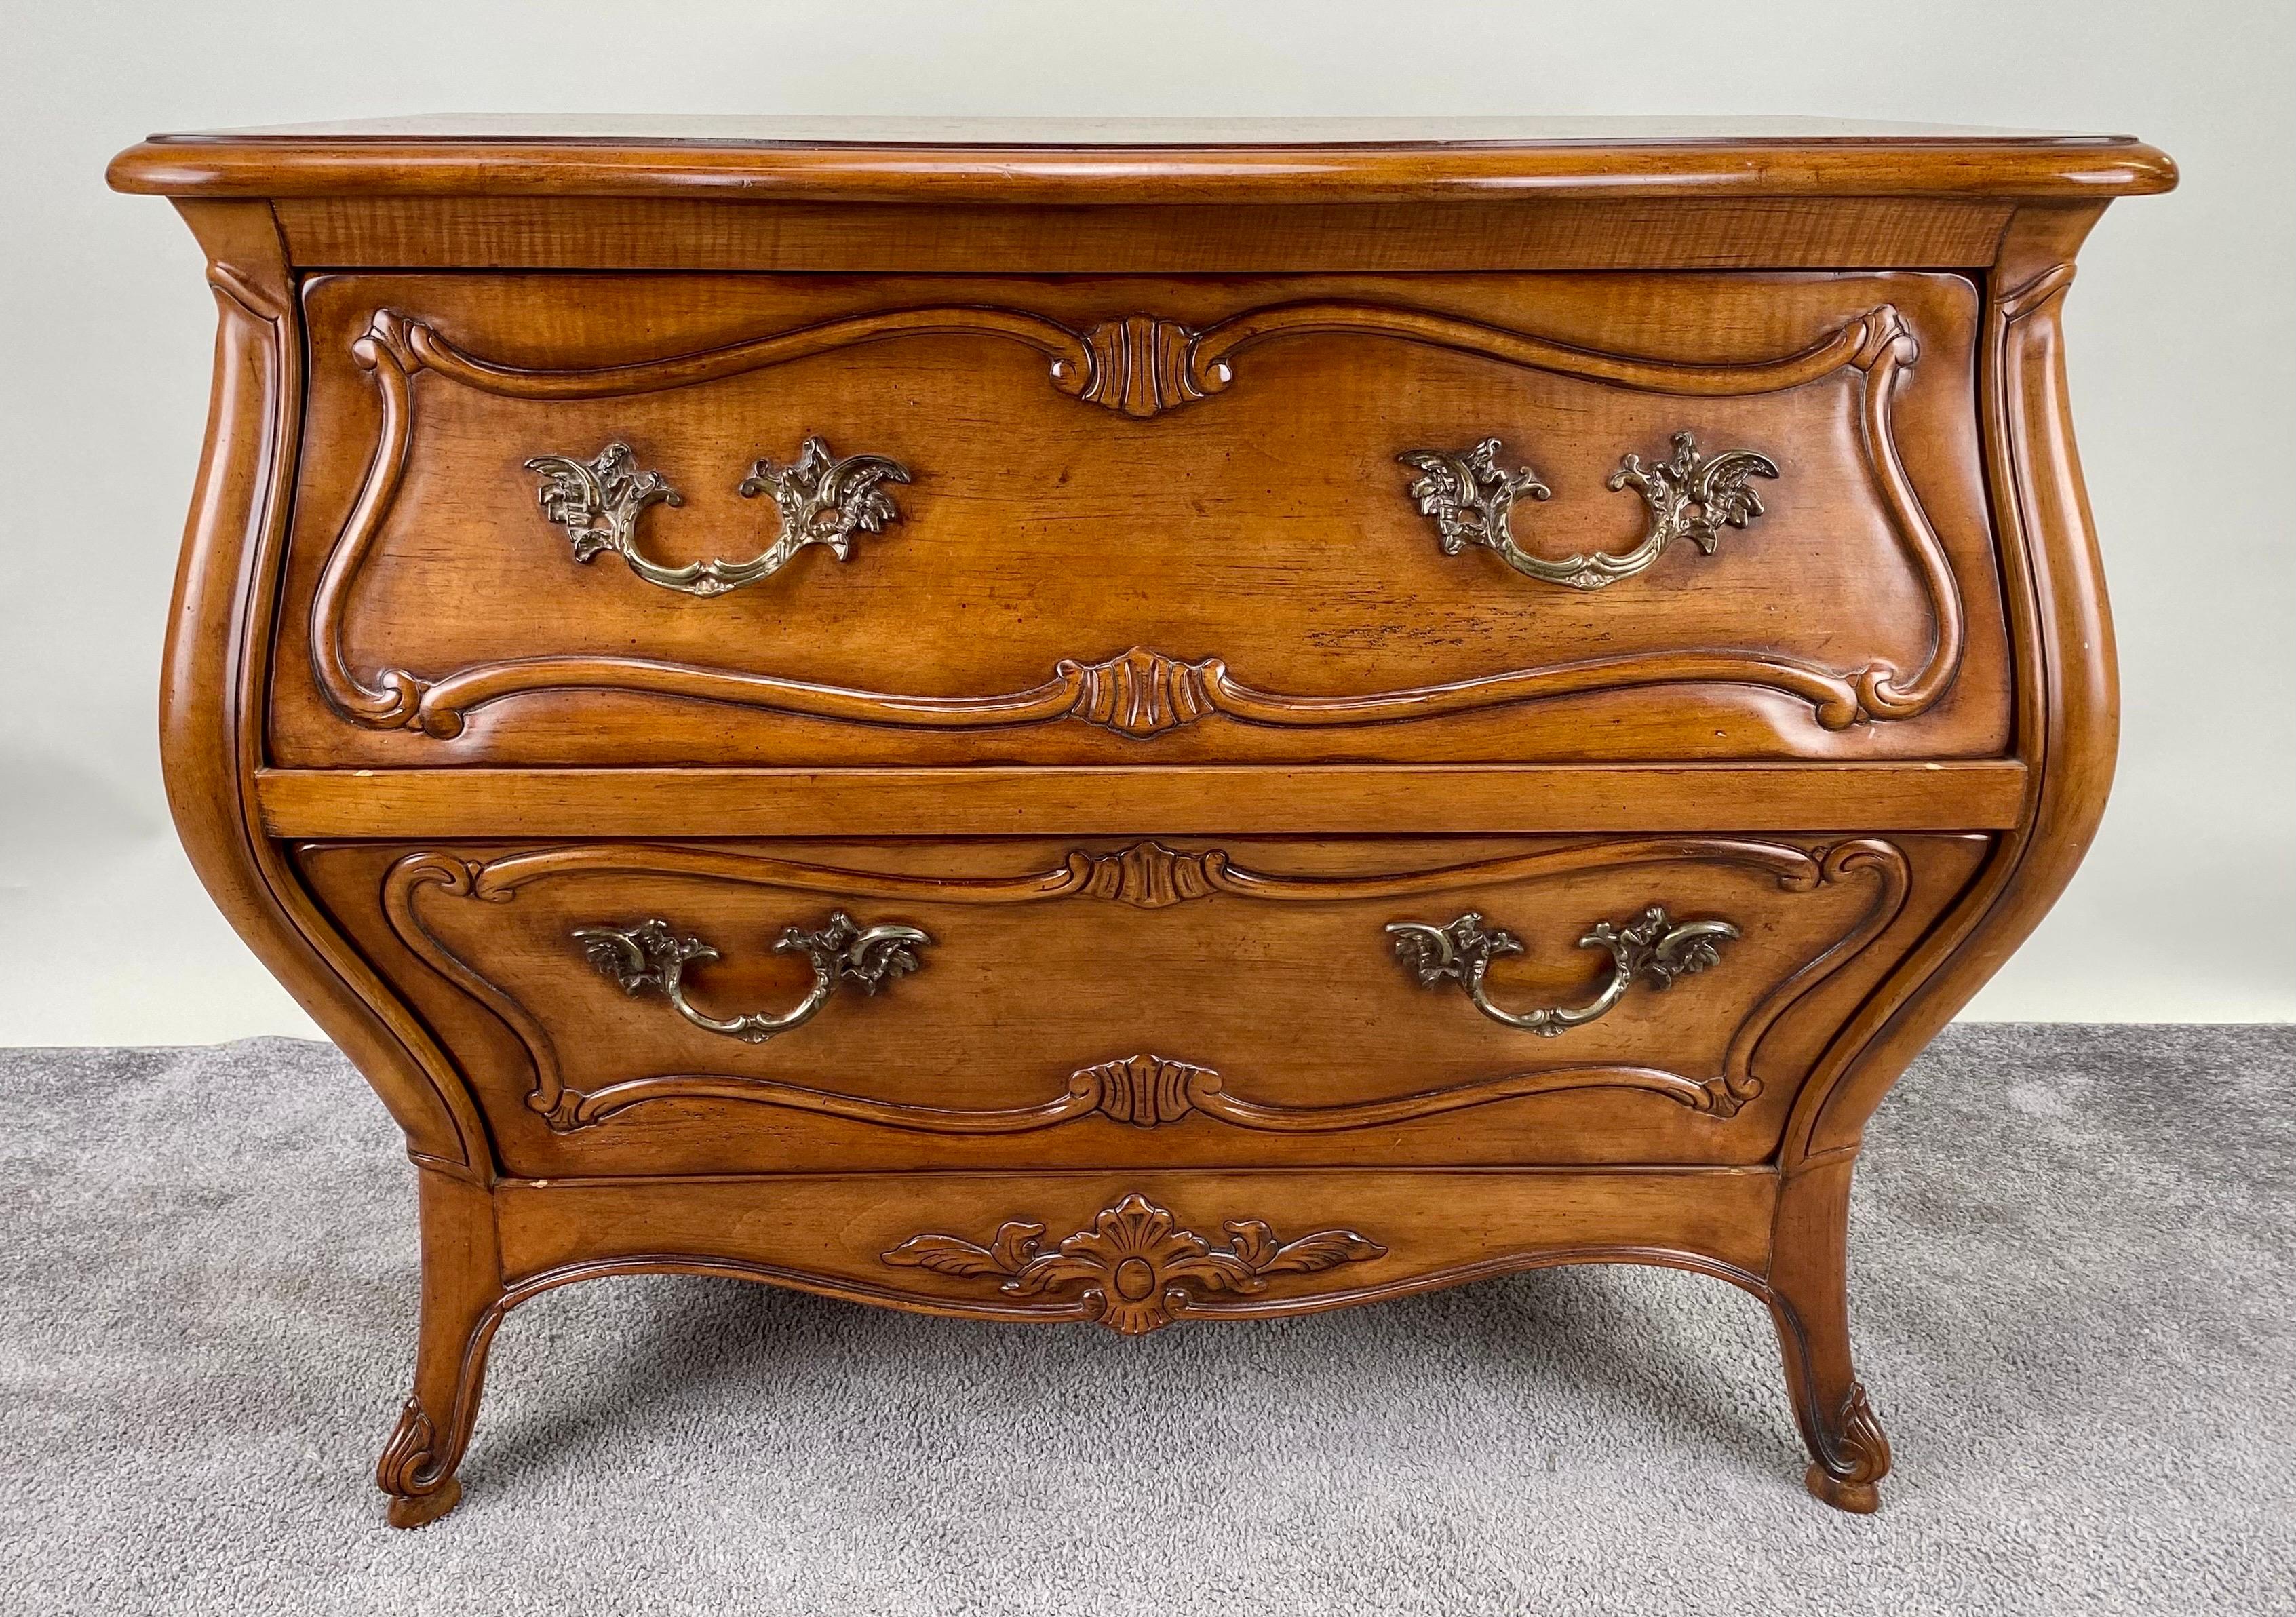  A captivating pair of Louis XV-style French Provincial Bombe nightstands or chests meticulously crafted by Century from the 